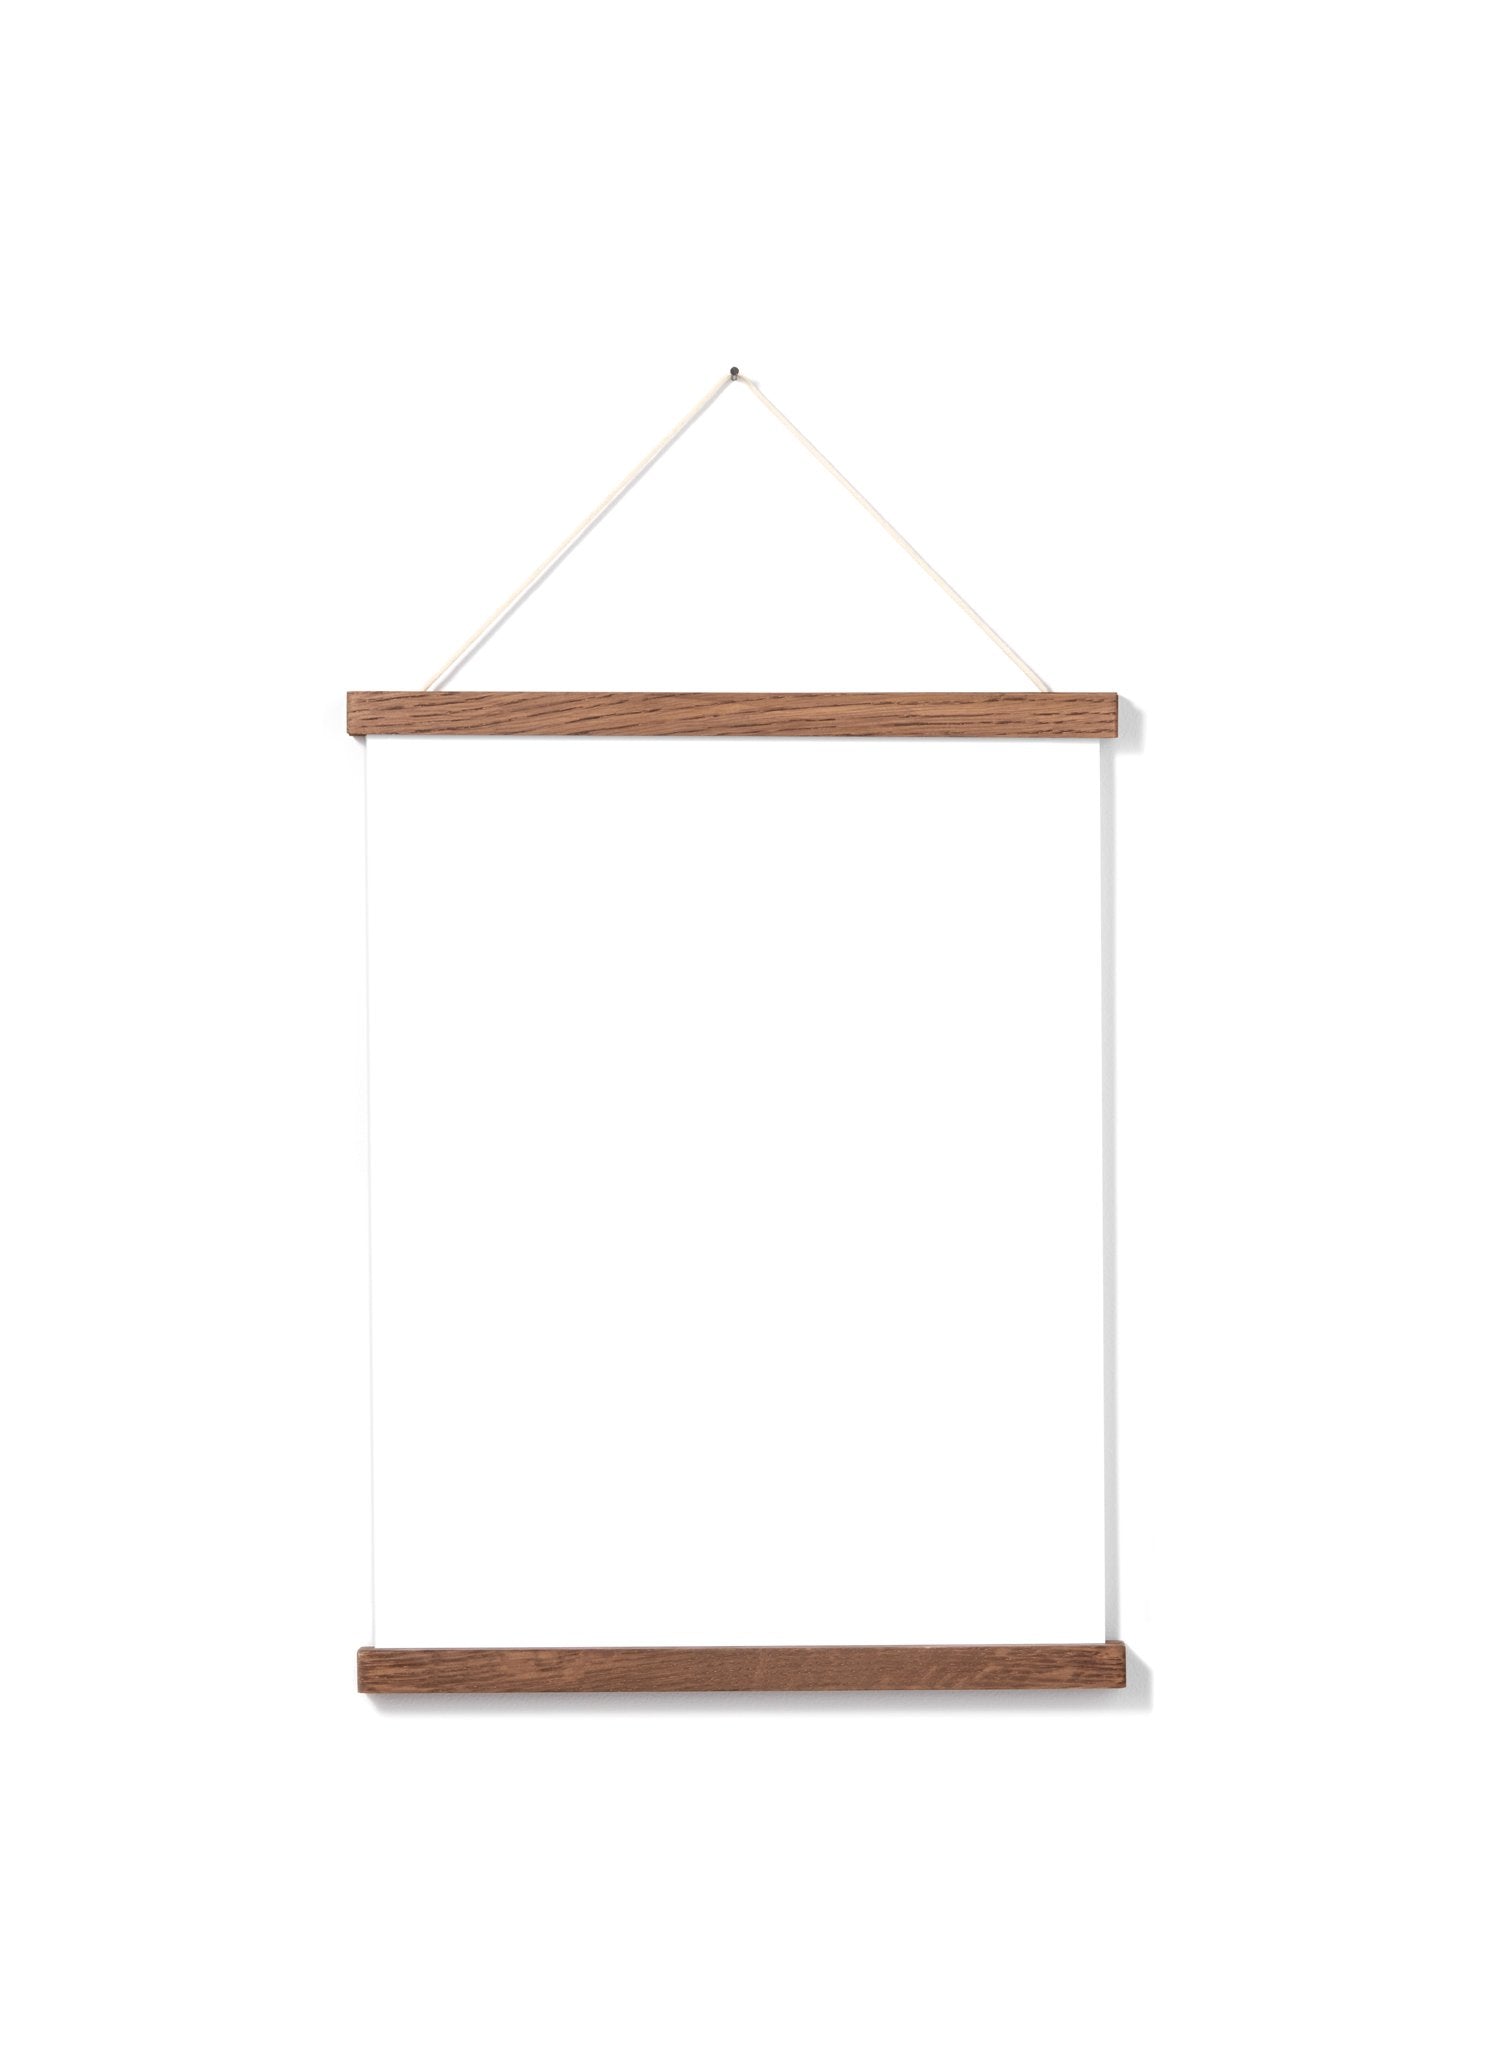 Scandinavian dark oak poster wall hanger by Opposite Wall - Front of the poster hanger - Size 12 inches